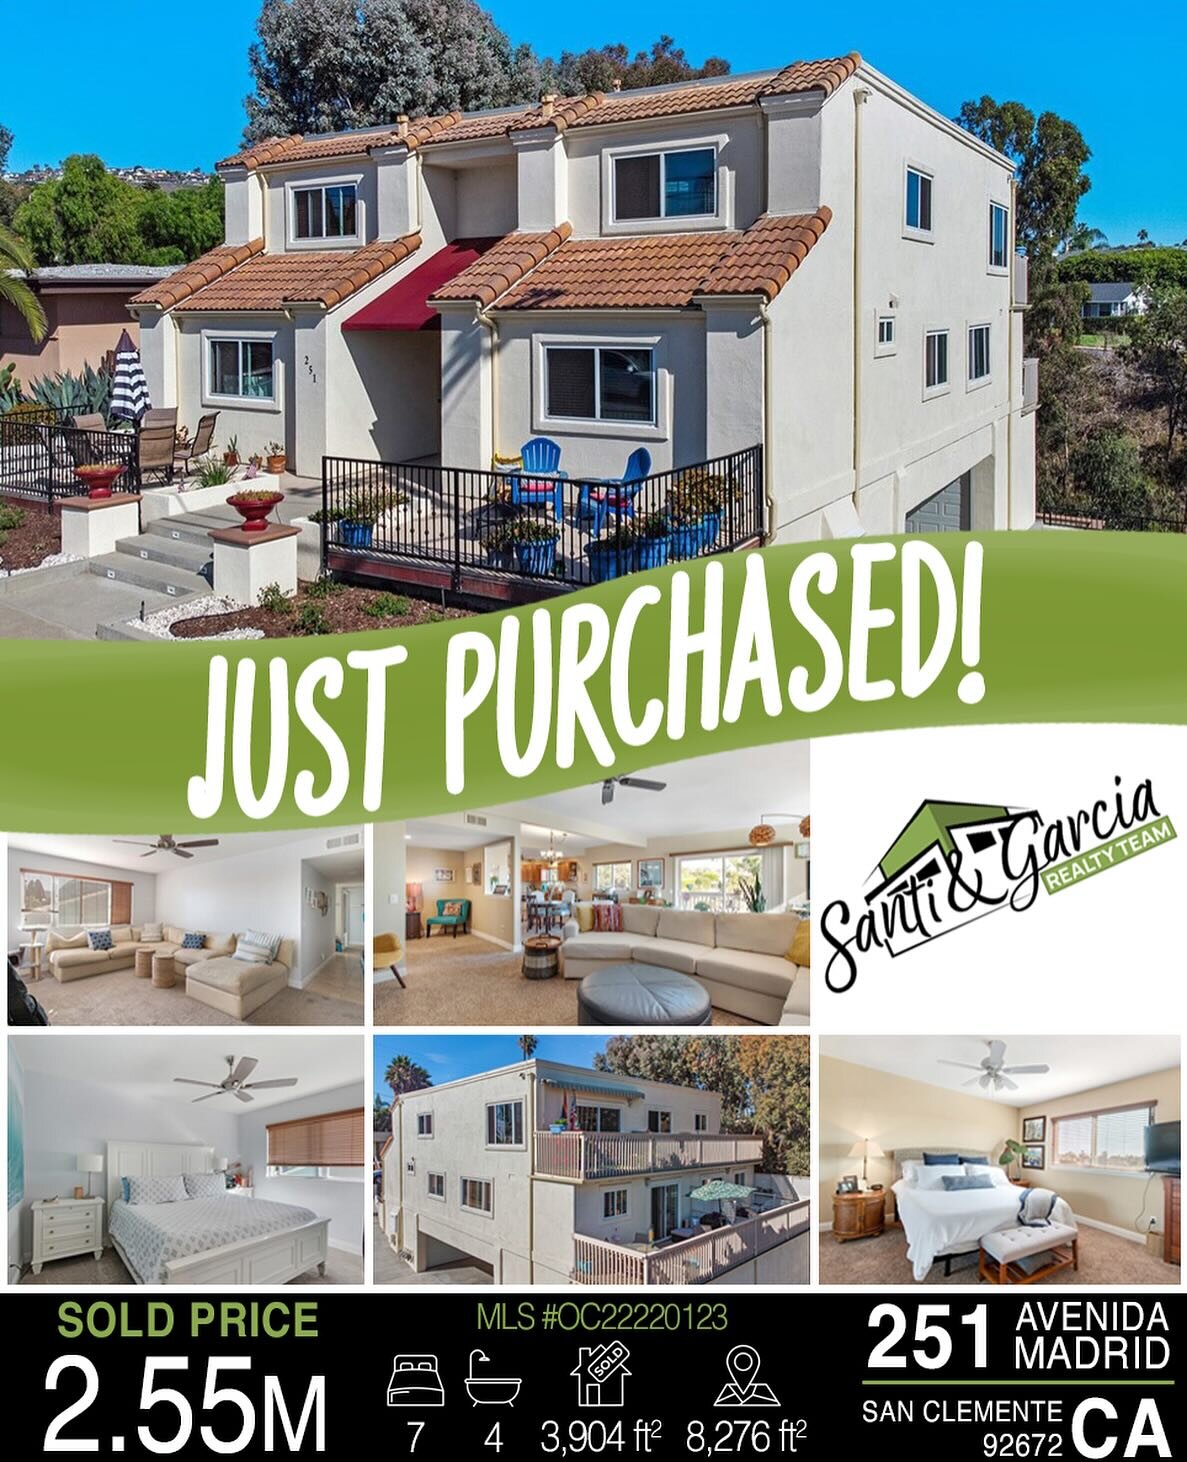 🥂JUST PURCHASED‼️

📍251 Avenida Madrid San Clemente, CA 92672

👉More info at santigarciarealty.com

#SantiGarciaRealty #realestate #realtor #realty #carealestategroup #commercialrealestate #residentialrealestate